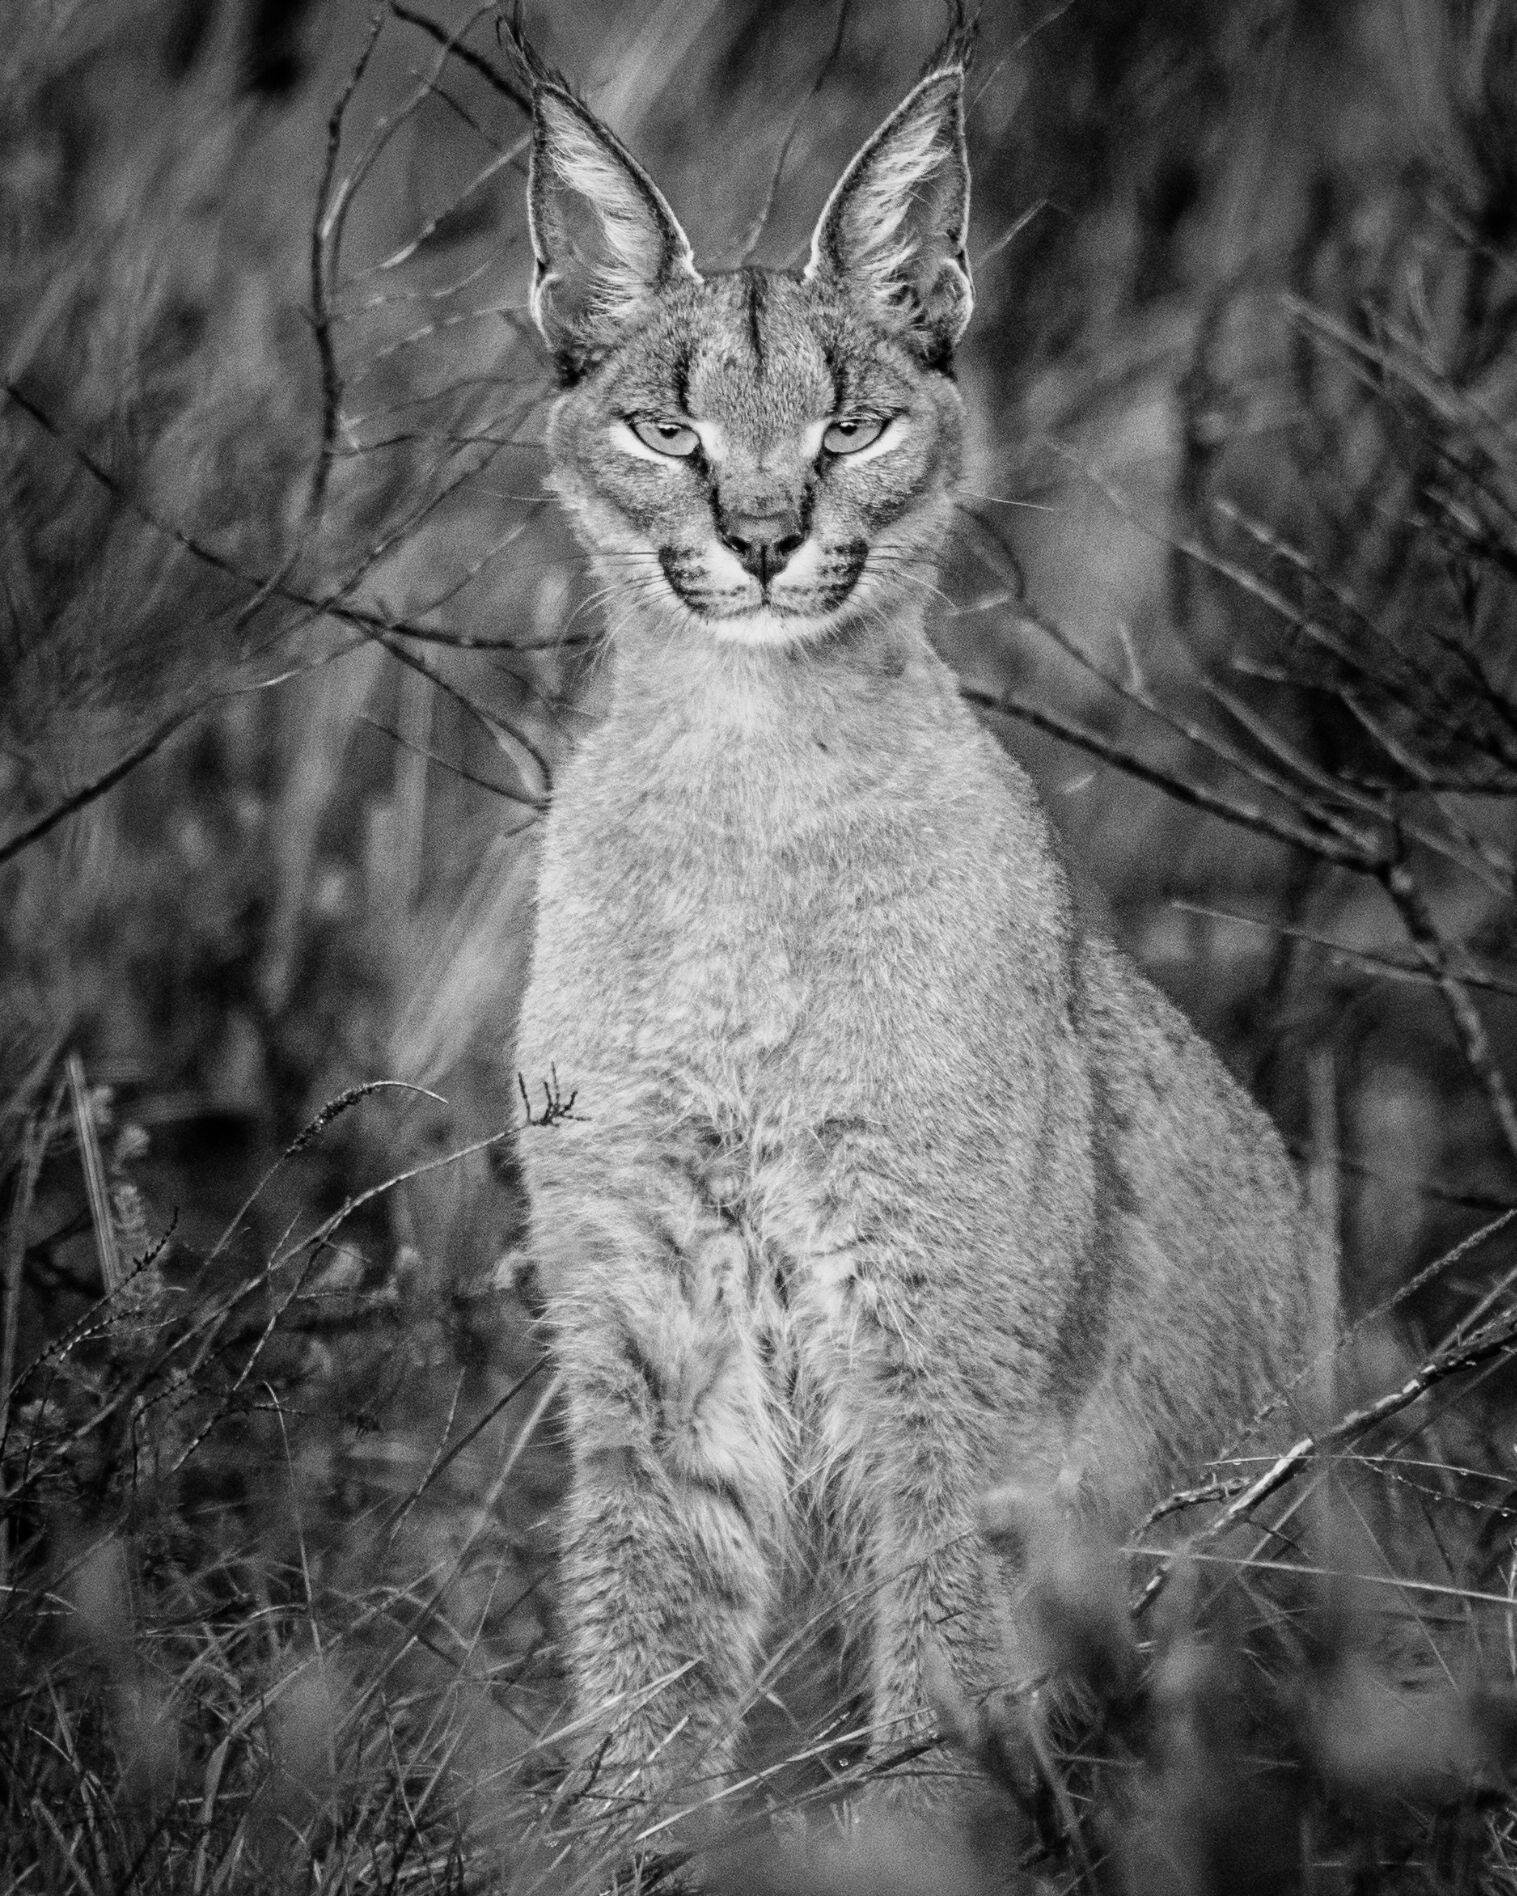 Let's celebrate #nationalcatday with a portrait of one of the most beautiful cats.
A Caracal is a medium sized wild-cat and one the most spectacular cats to photograph, However it is not that easy, because of their skittish behavior. Their name means